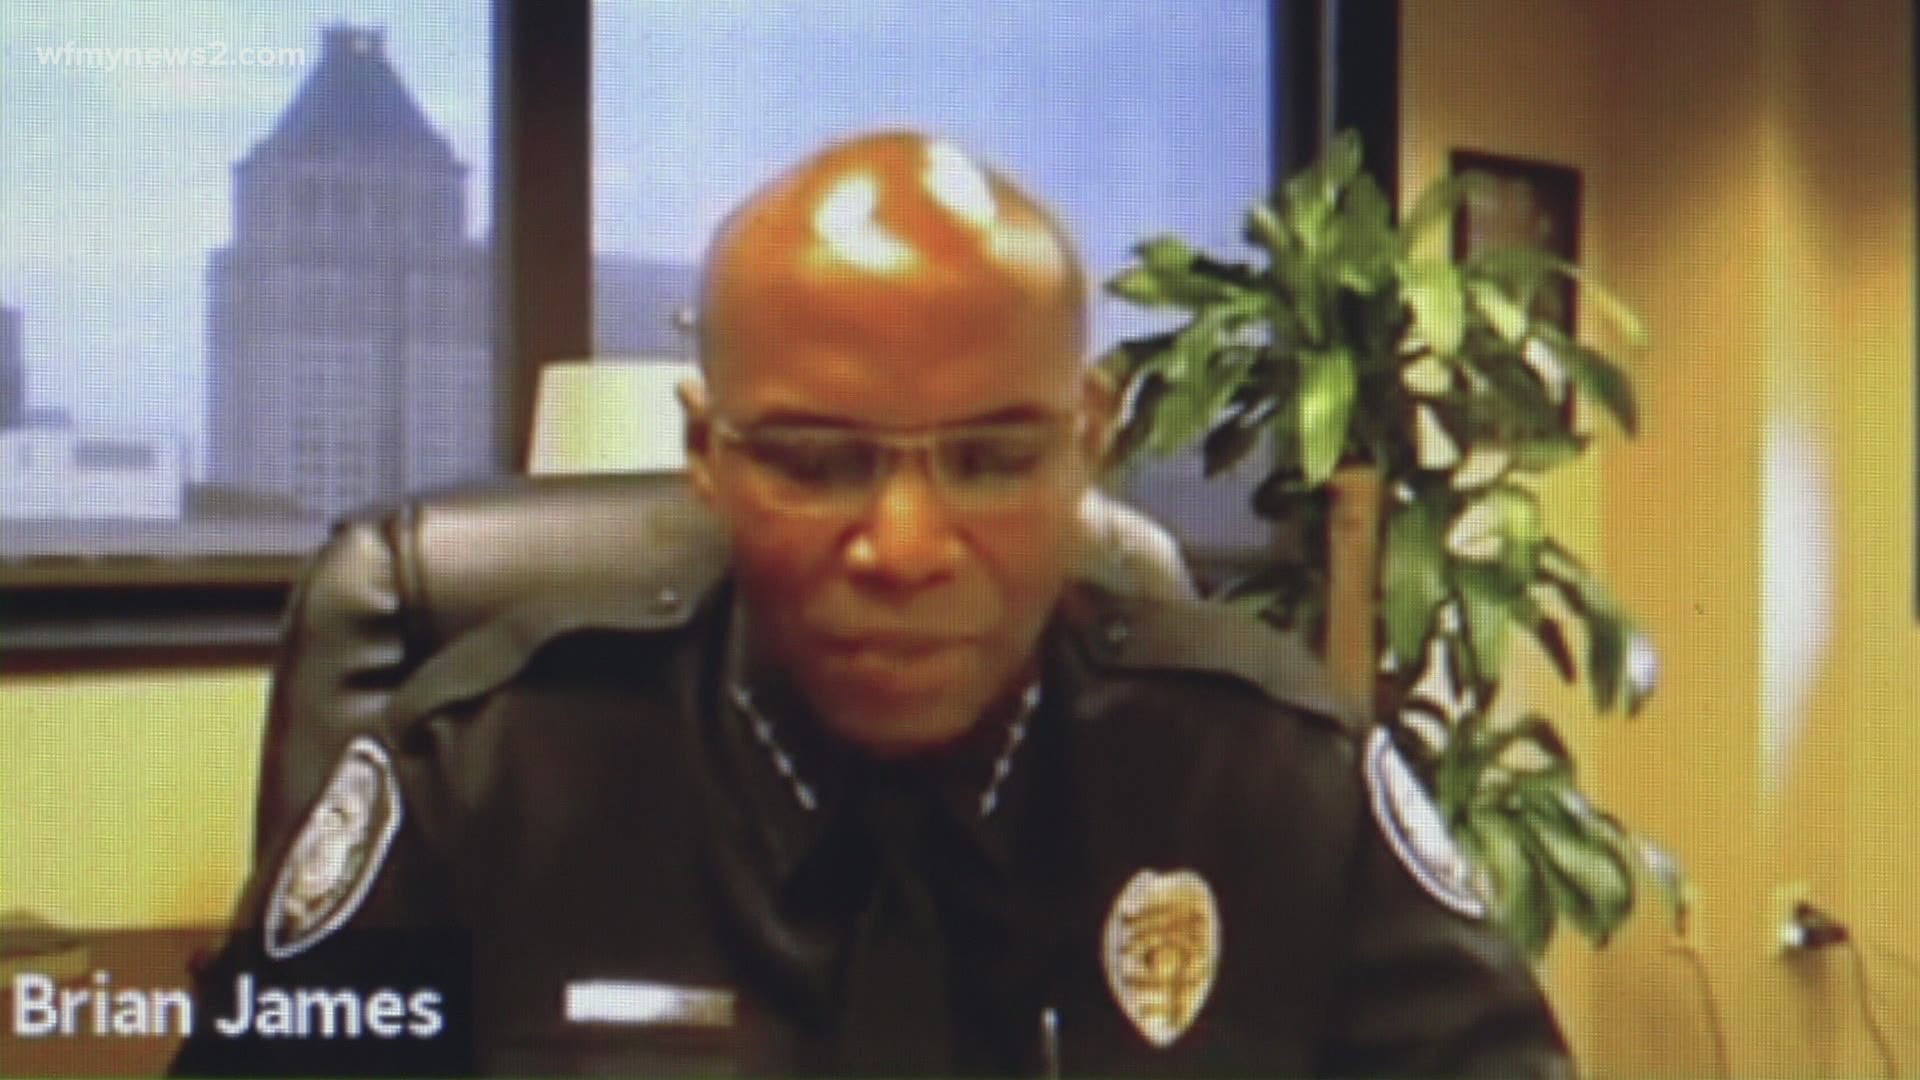 Greensboro police chief Brian James and High Point police chief Travis Stroud said avoiding police brutality comes down to training and empathy.